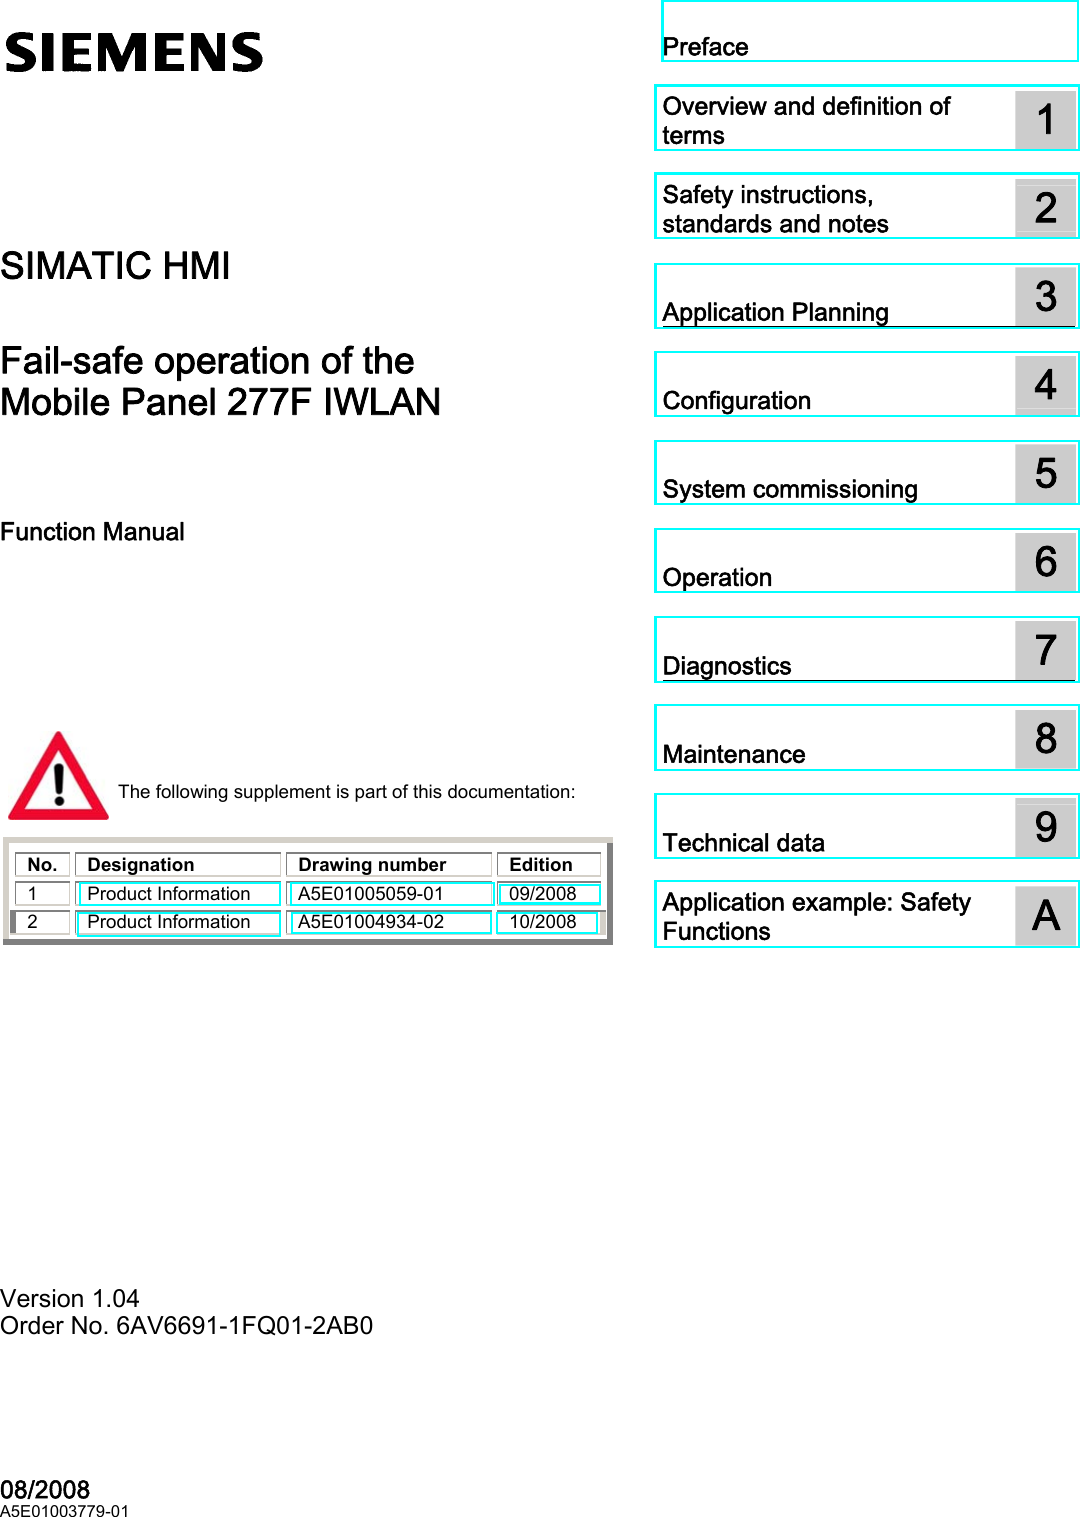 SIMATIC HMI Fail-safe operation of the Mobile Panel 277F IWLAN  ____________________________________________________________________________________________________________________________________________Preface  Overview and definition of terms  1 Safety instructions, standards and notes  2 Application Planning  3 Configuration  4 System commissioning  5 Operation  6 Diagnostics  7 Maintenance  8 Technical data  9 Application example: Safety Functions  A SIMATIC HMIFail-safe operation of the Mobile Panel 277F IWLAN  Function Manual 08/2008 A5E01003779-01 Version 1.04  Order No. 6AV6691-1FQ01-2AB0 The following supplement is part of this documentation:     No. Designation  Drawing number  Edition 1 Product Information A5E01005059-01  09/2008 2 Product Information A5E01004934-02  10/2008    